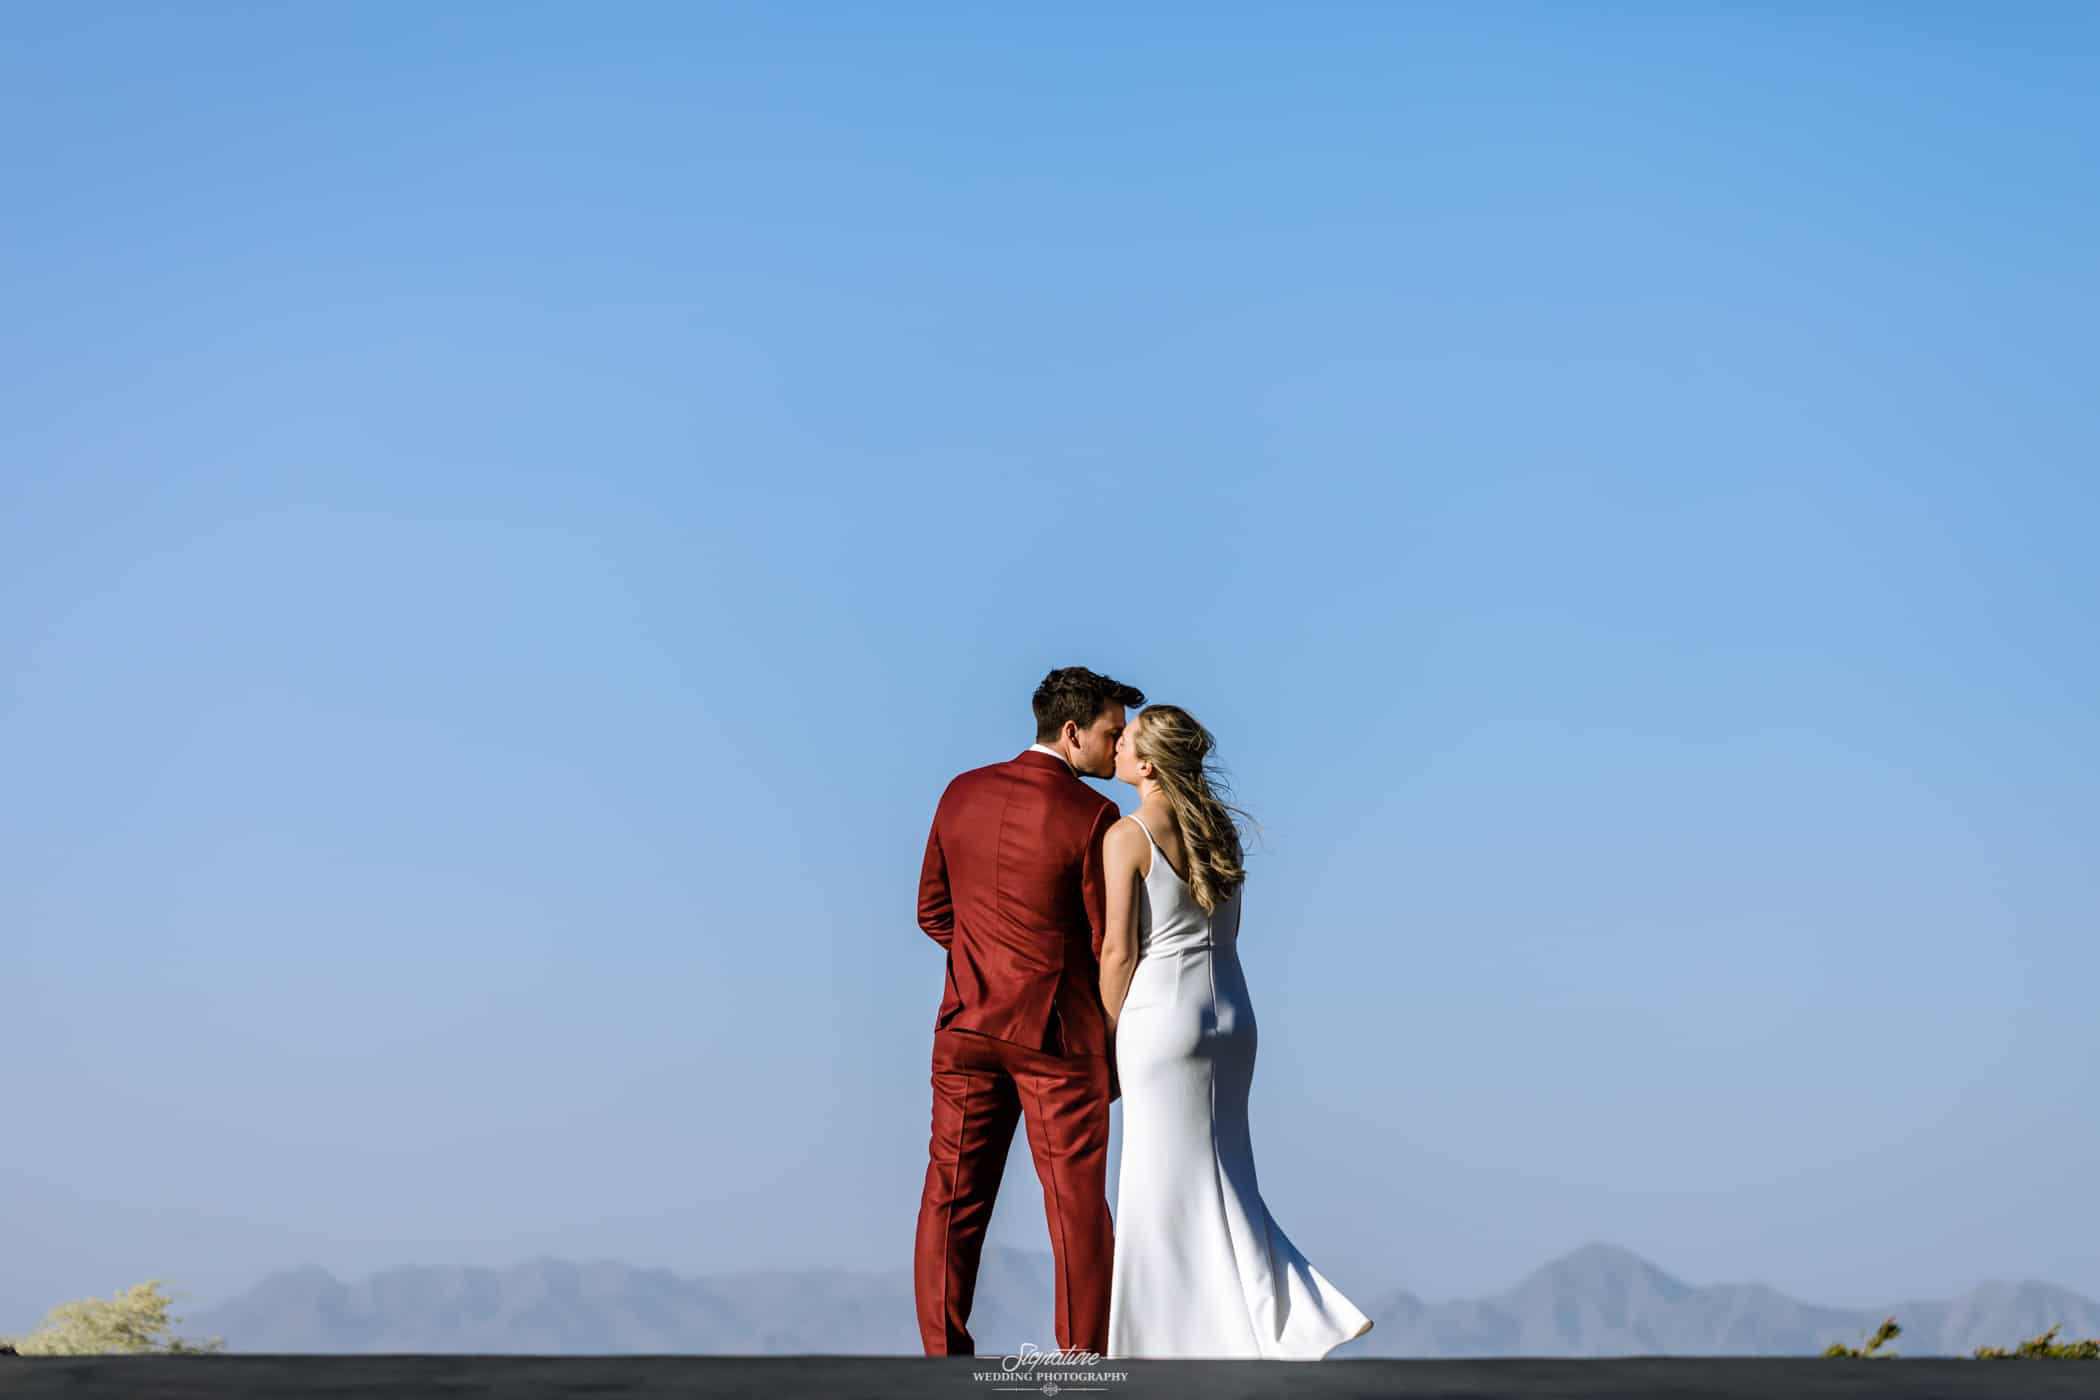 Behind shot of bride and groom kissing with mountains in background